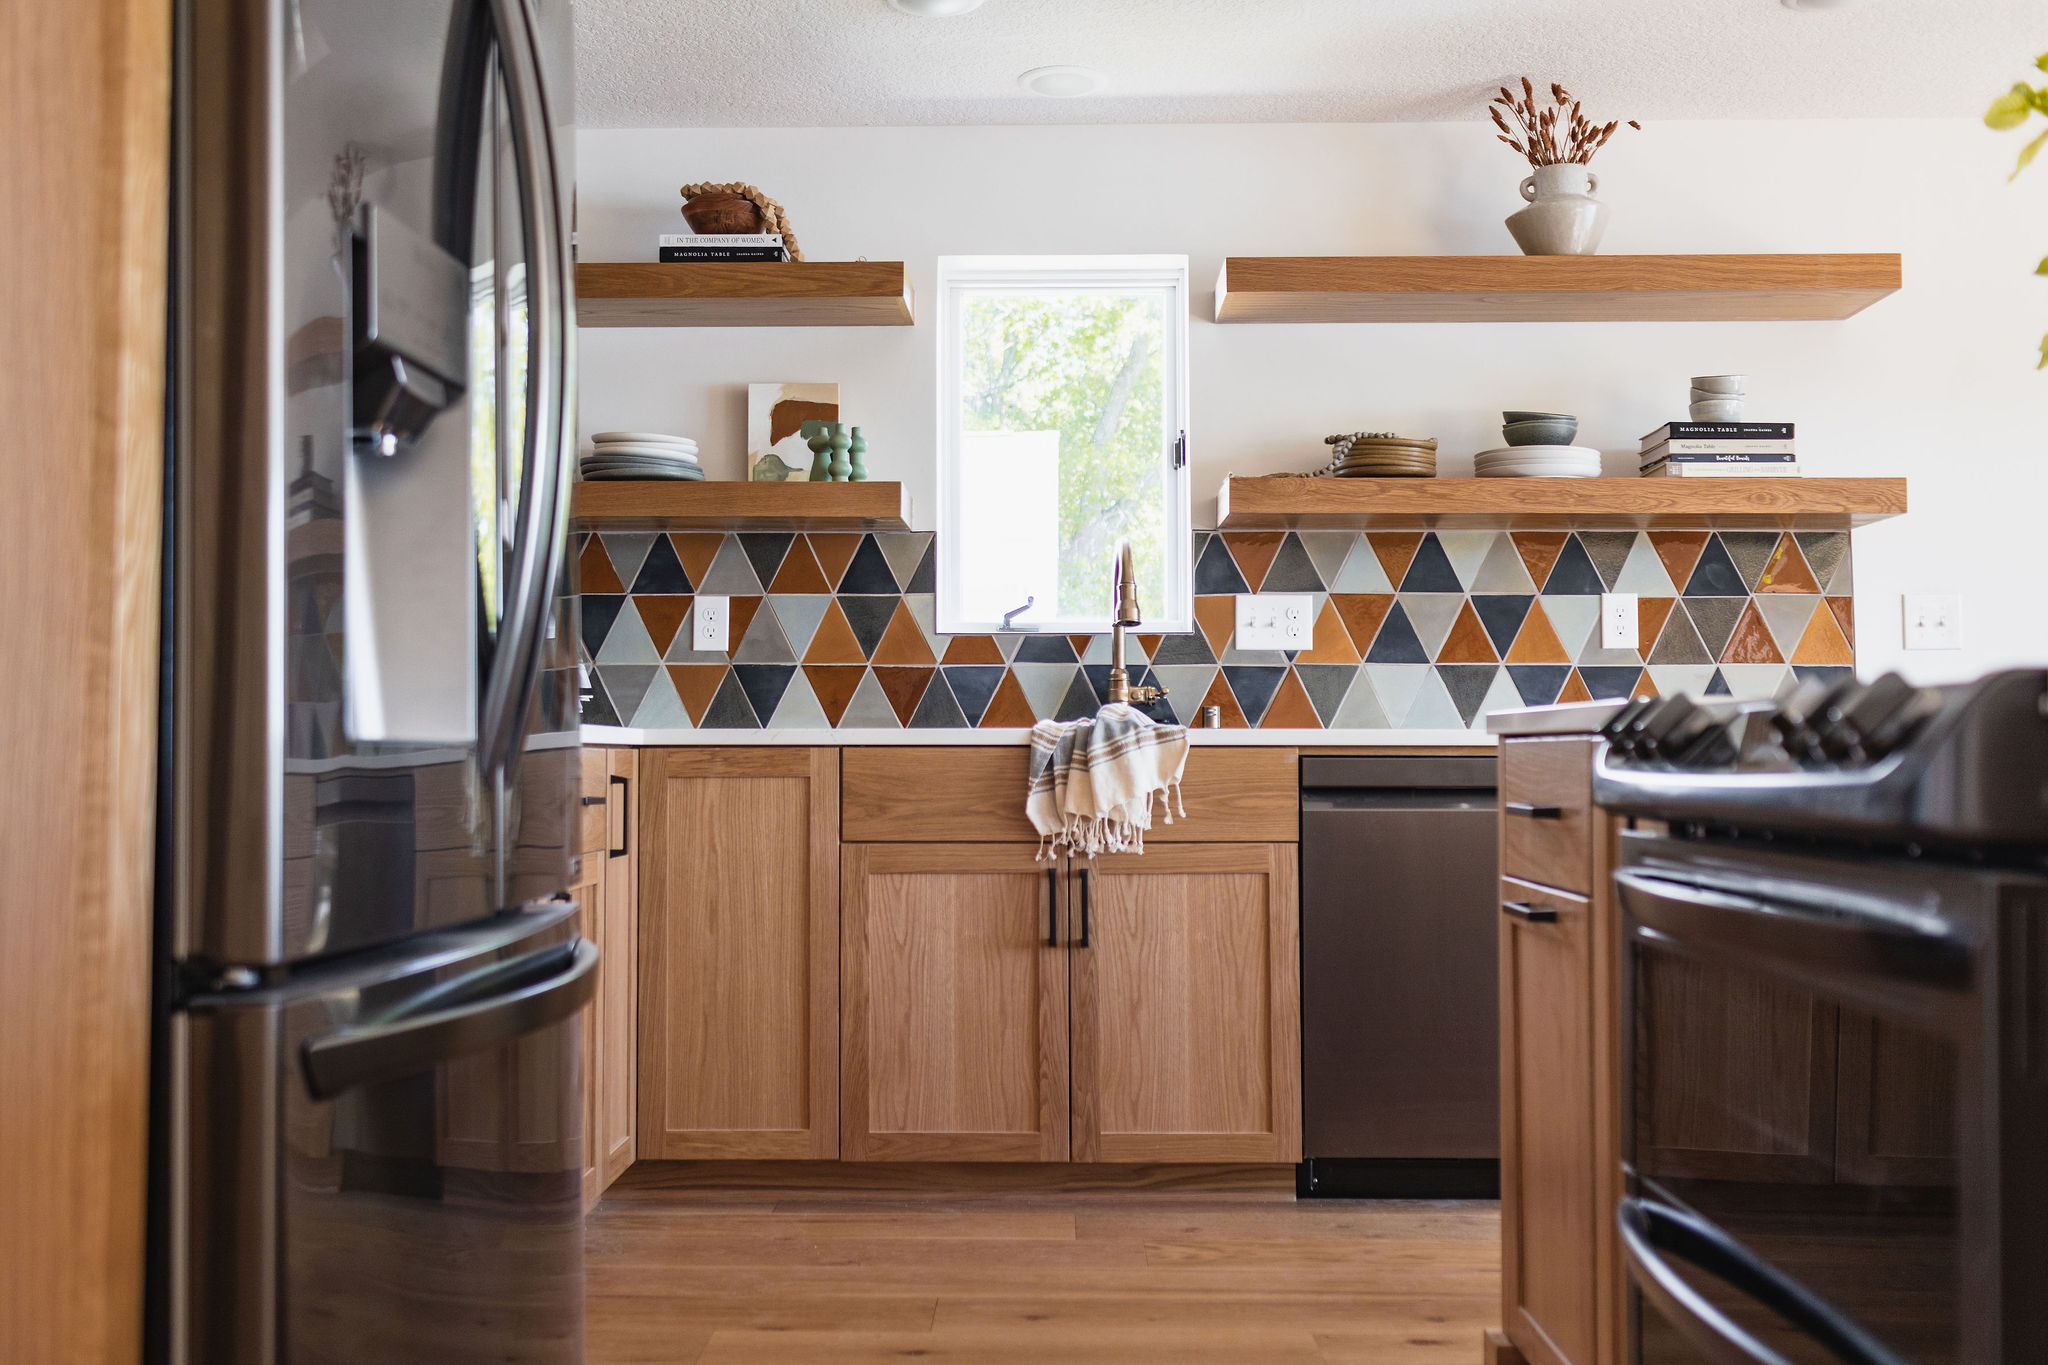 Cabinetry Design Options | Cabinetry 101 2